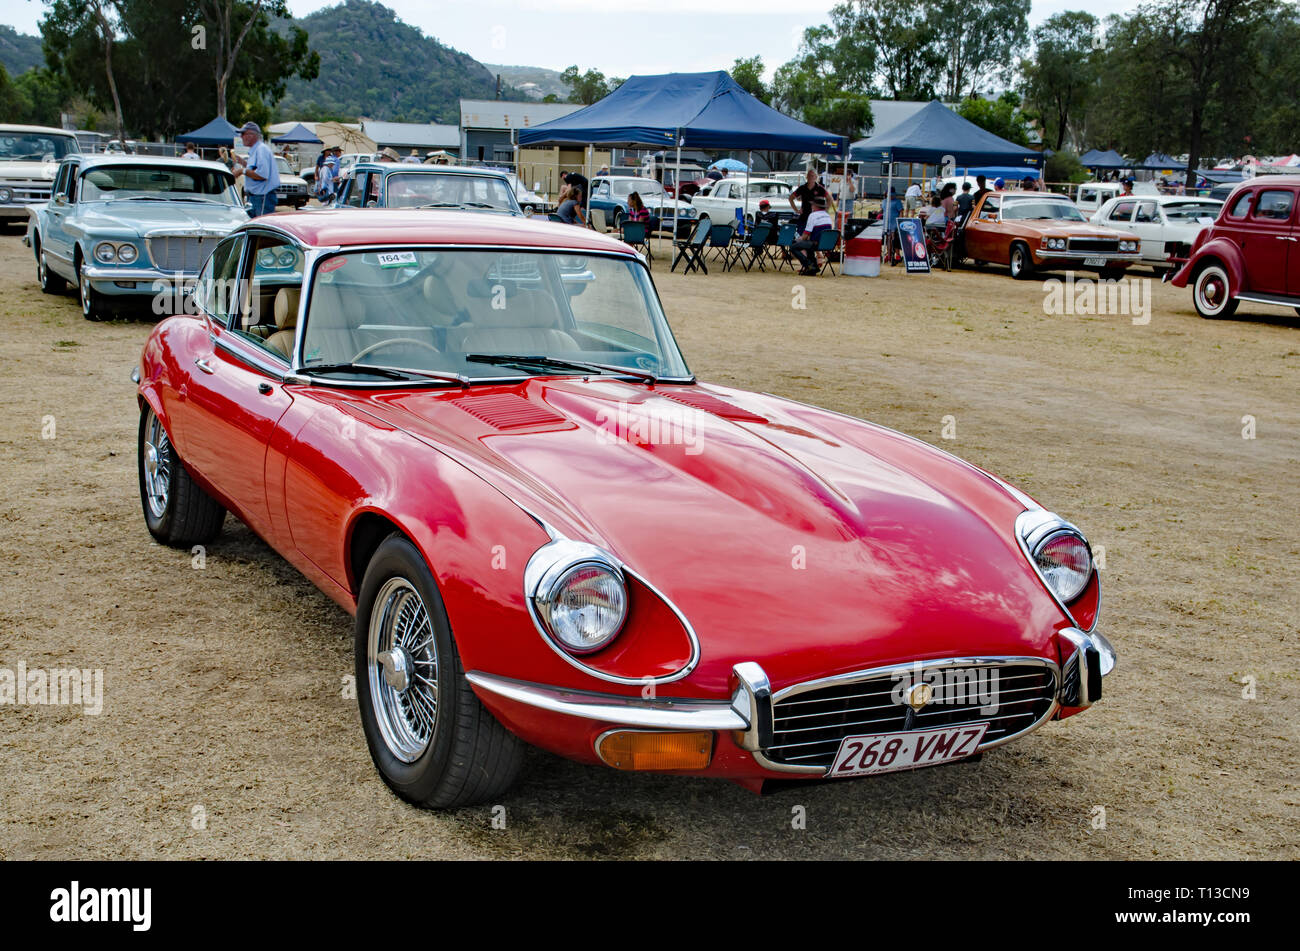 A Red E Type Jaguar V12 Coupe on display at Moonbi Car Show, NSW Australia Stock Photo